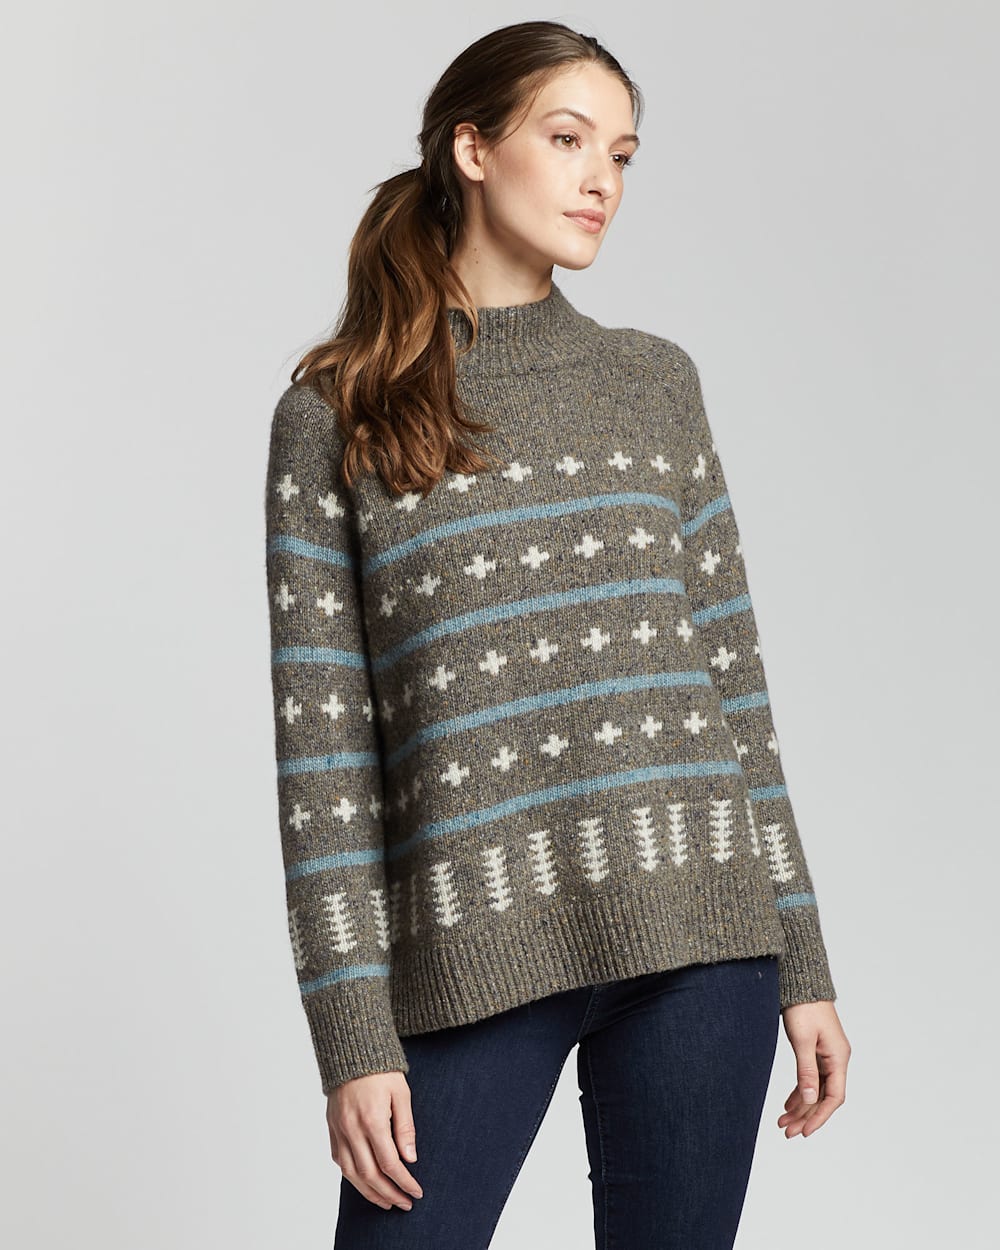 WOMEN'S GRAPHIC DONEGAL MERINO SWEATER IN GREY MULTI image number 1